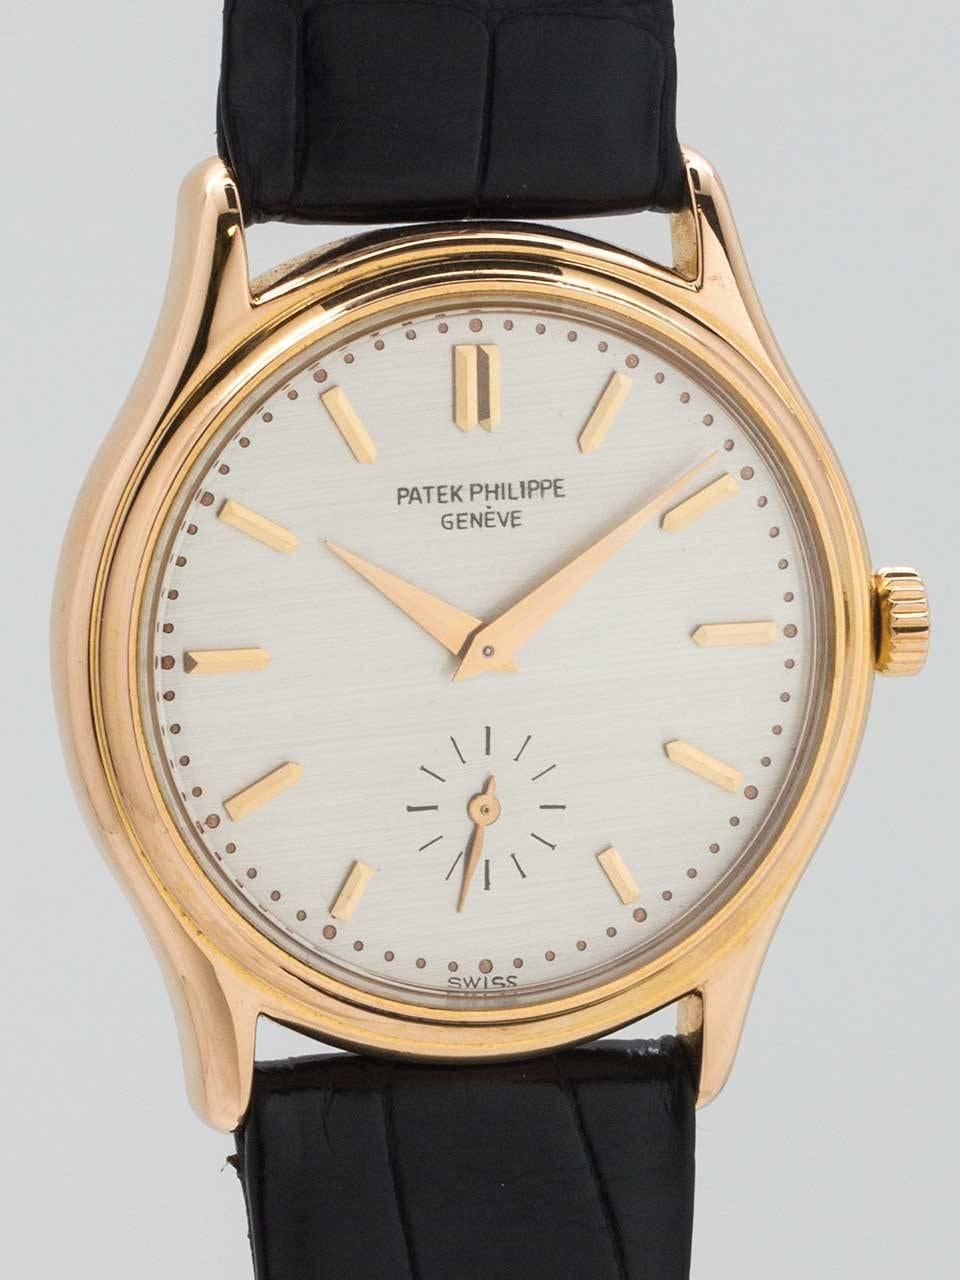 Patek Philippe 18K Pink Gold dress model ref # 3923 circa 1990’s. 32 X 38mm snap back case with original silver satin dial with applied pink gold indexes and tapered rose gold sword hands. Powered by 18 jewel manual wind movement with subsidiary